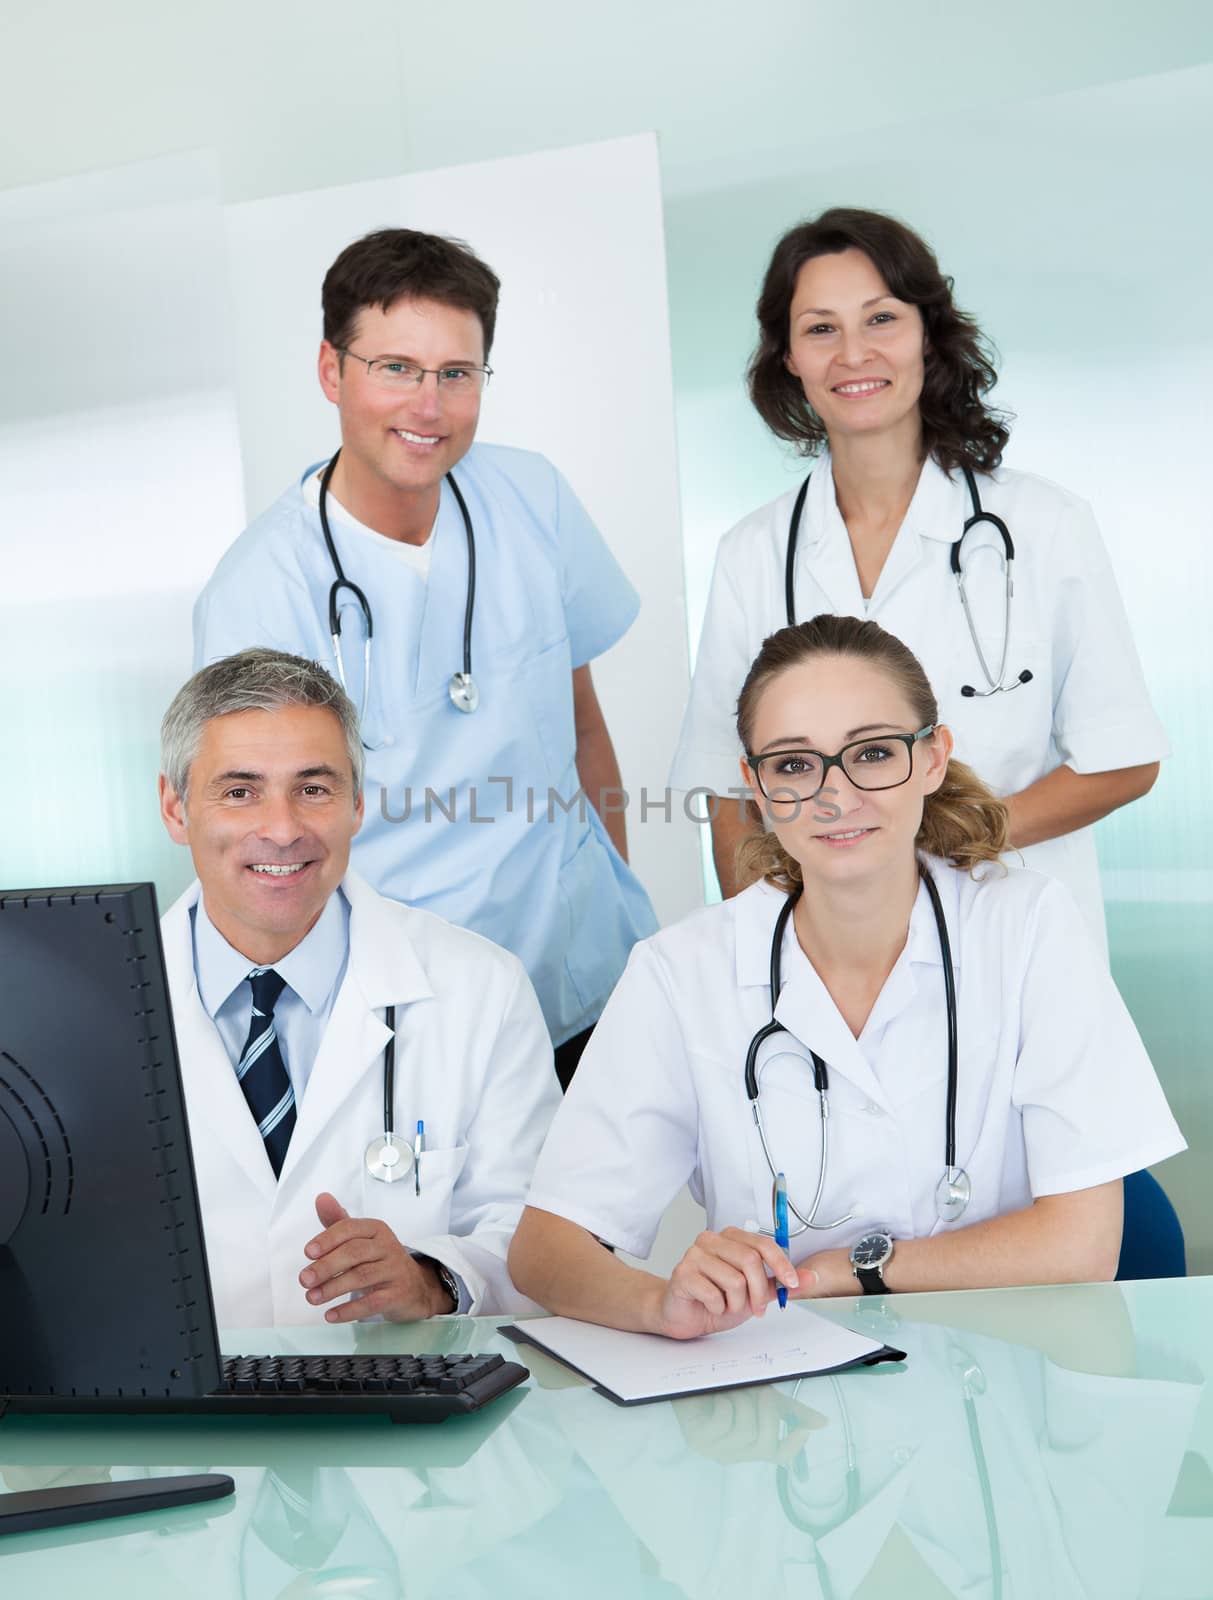 Medical team posing in an office by AndreyPopov